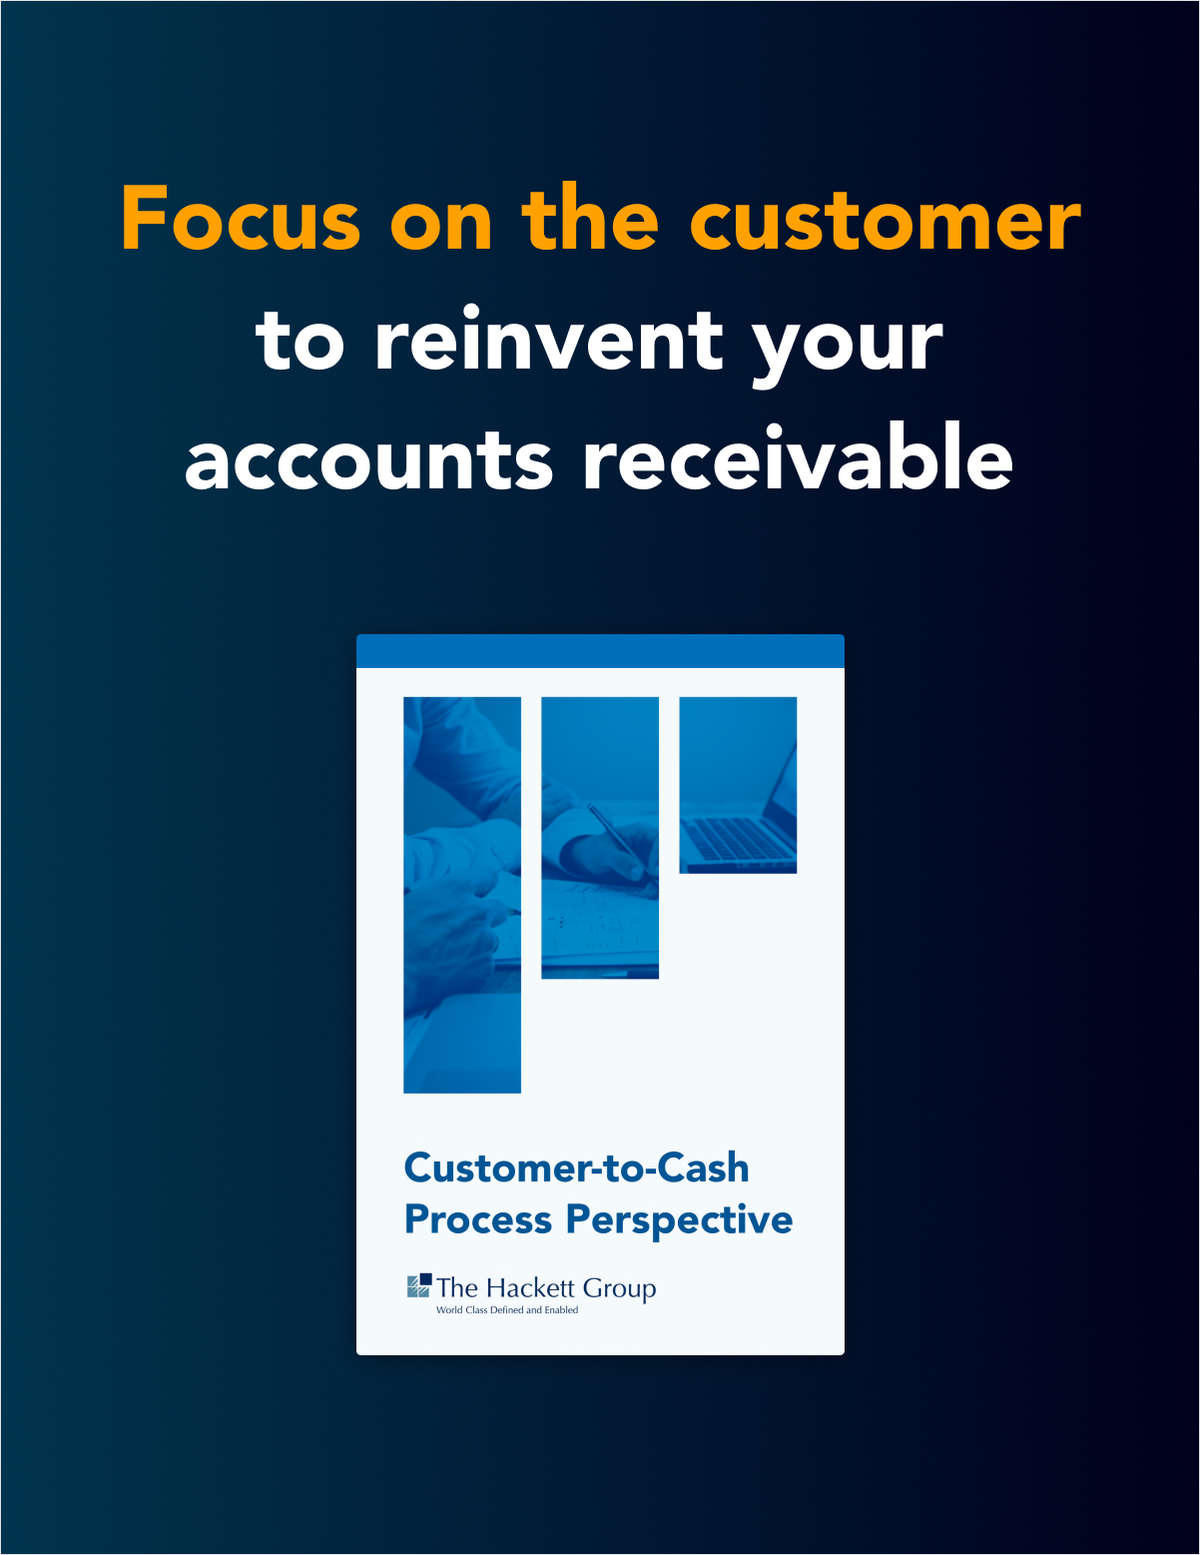 Focus on the customer to reinvent your accounts receivable